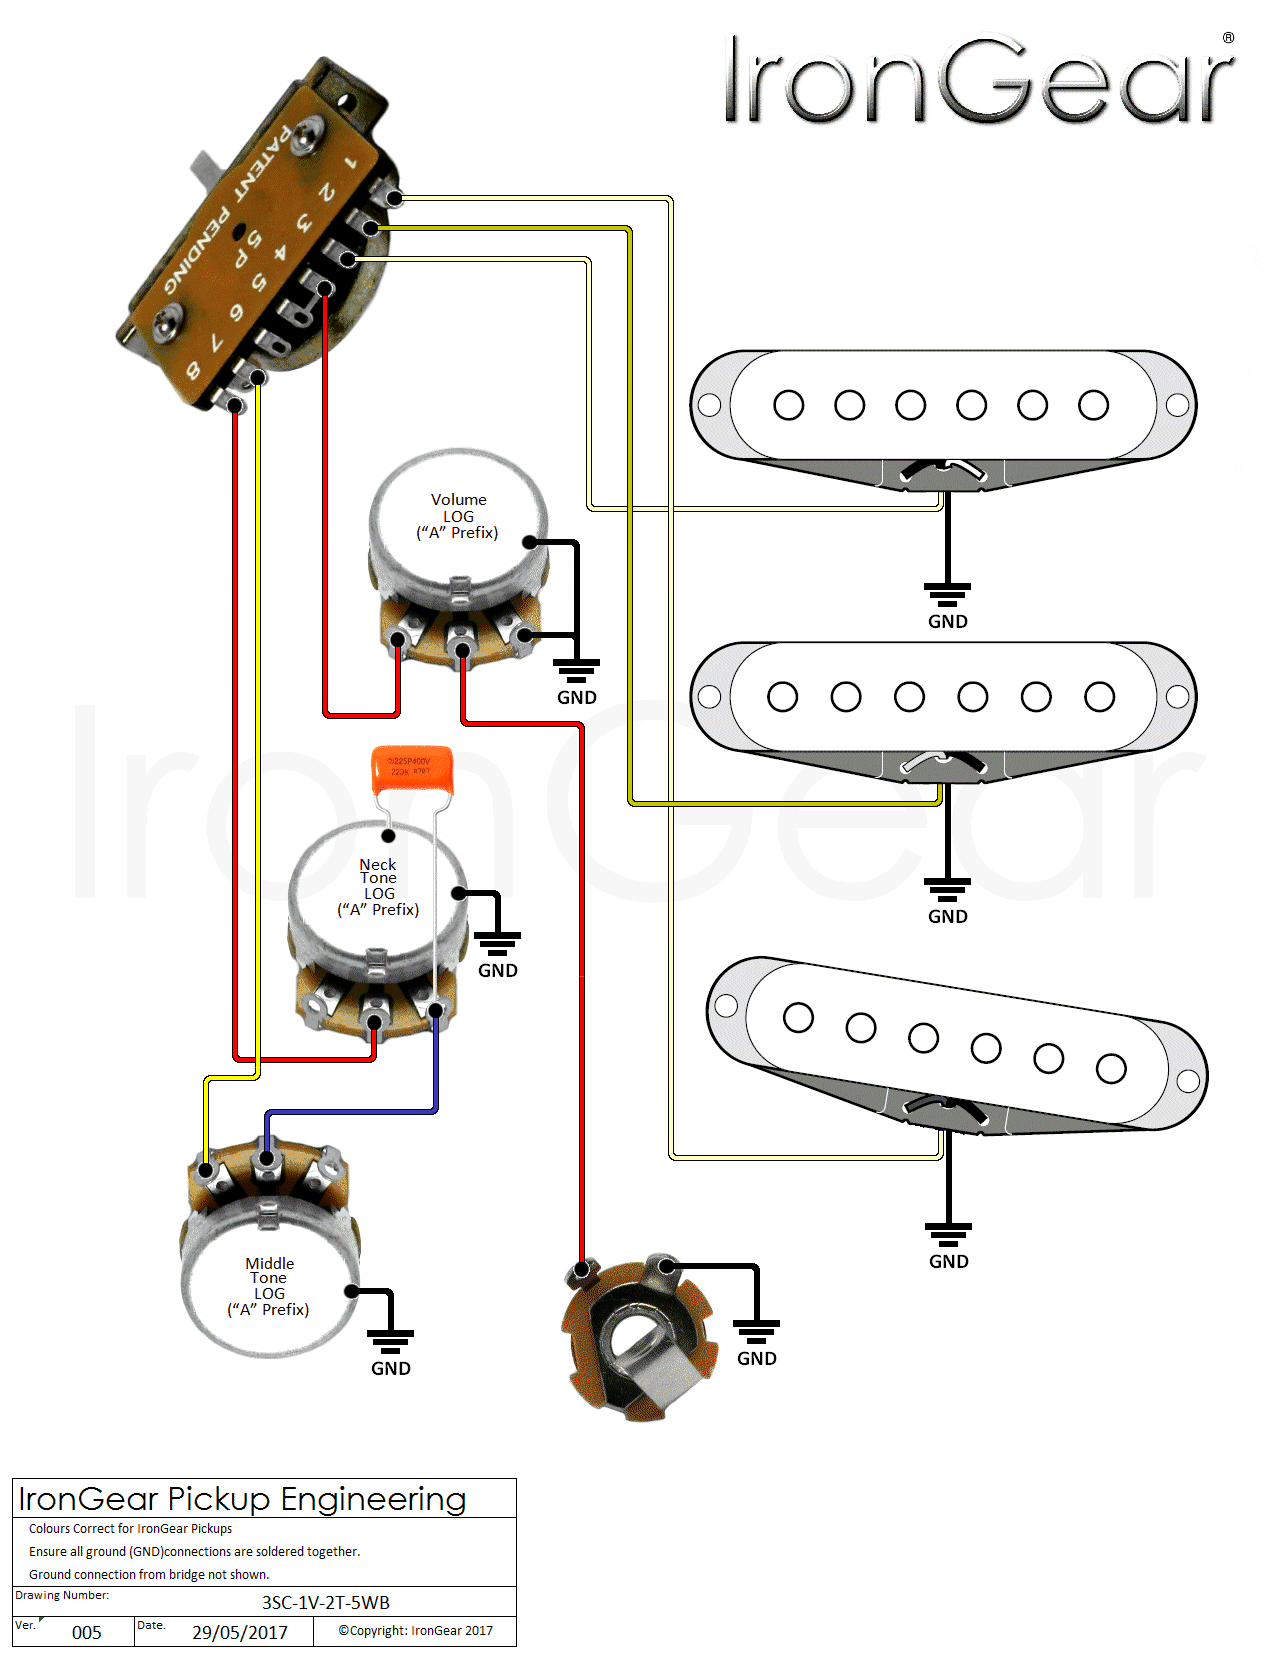 Wiring Diagram For 3 Pickup Les Paul from www.irongear.co.uk